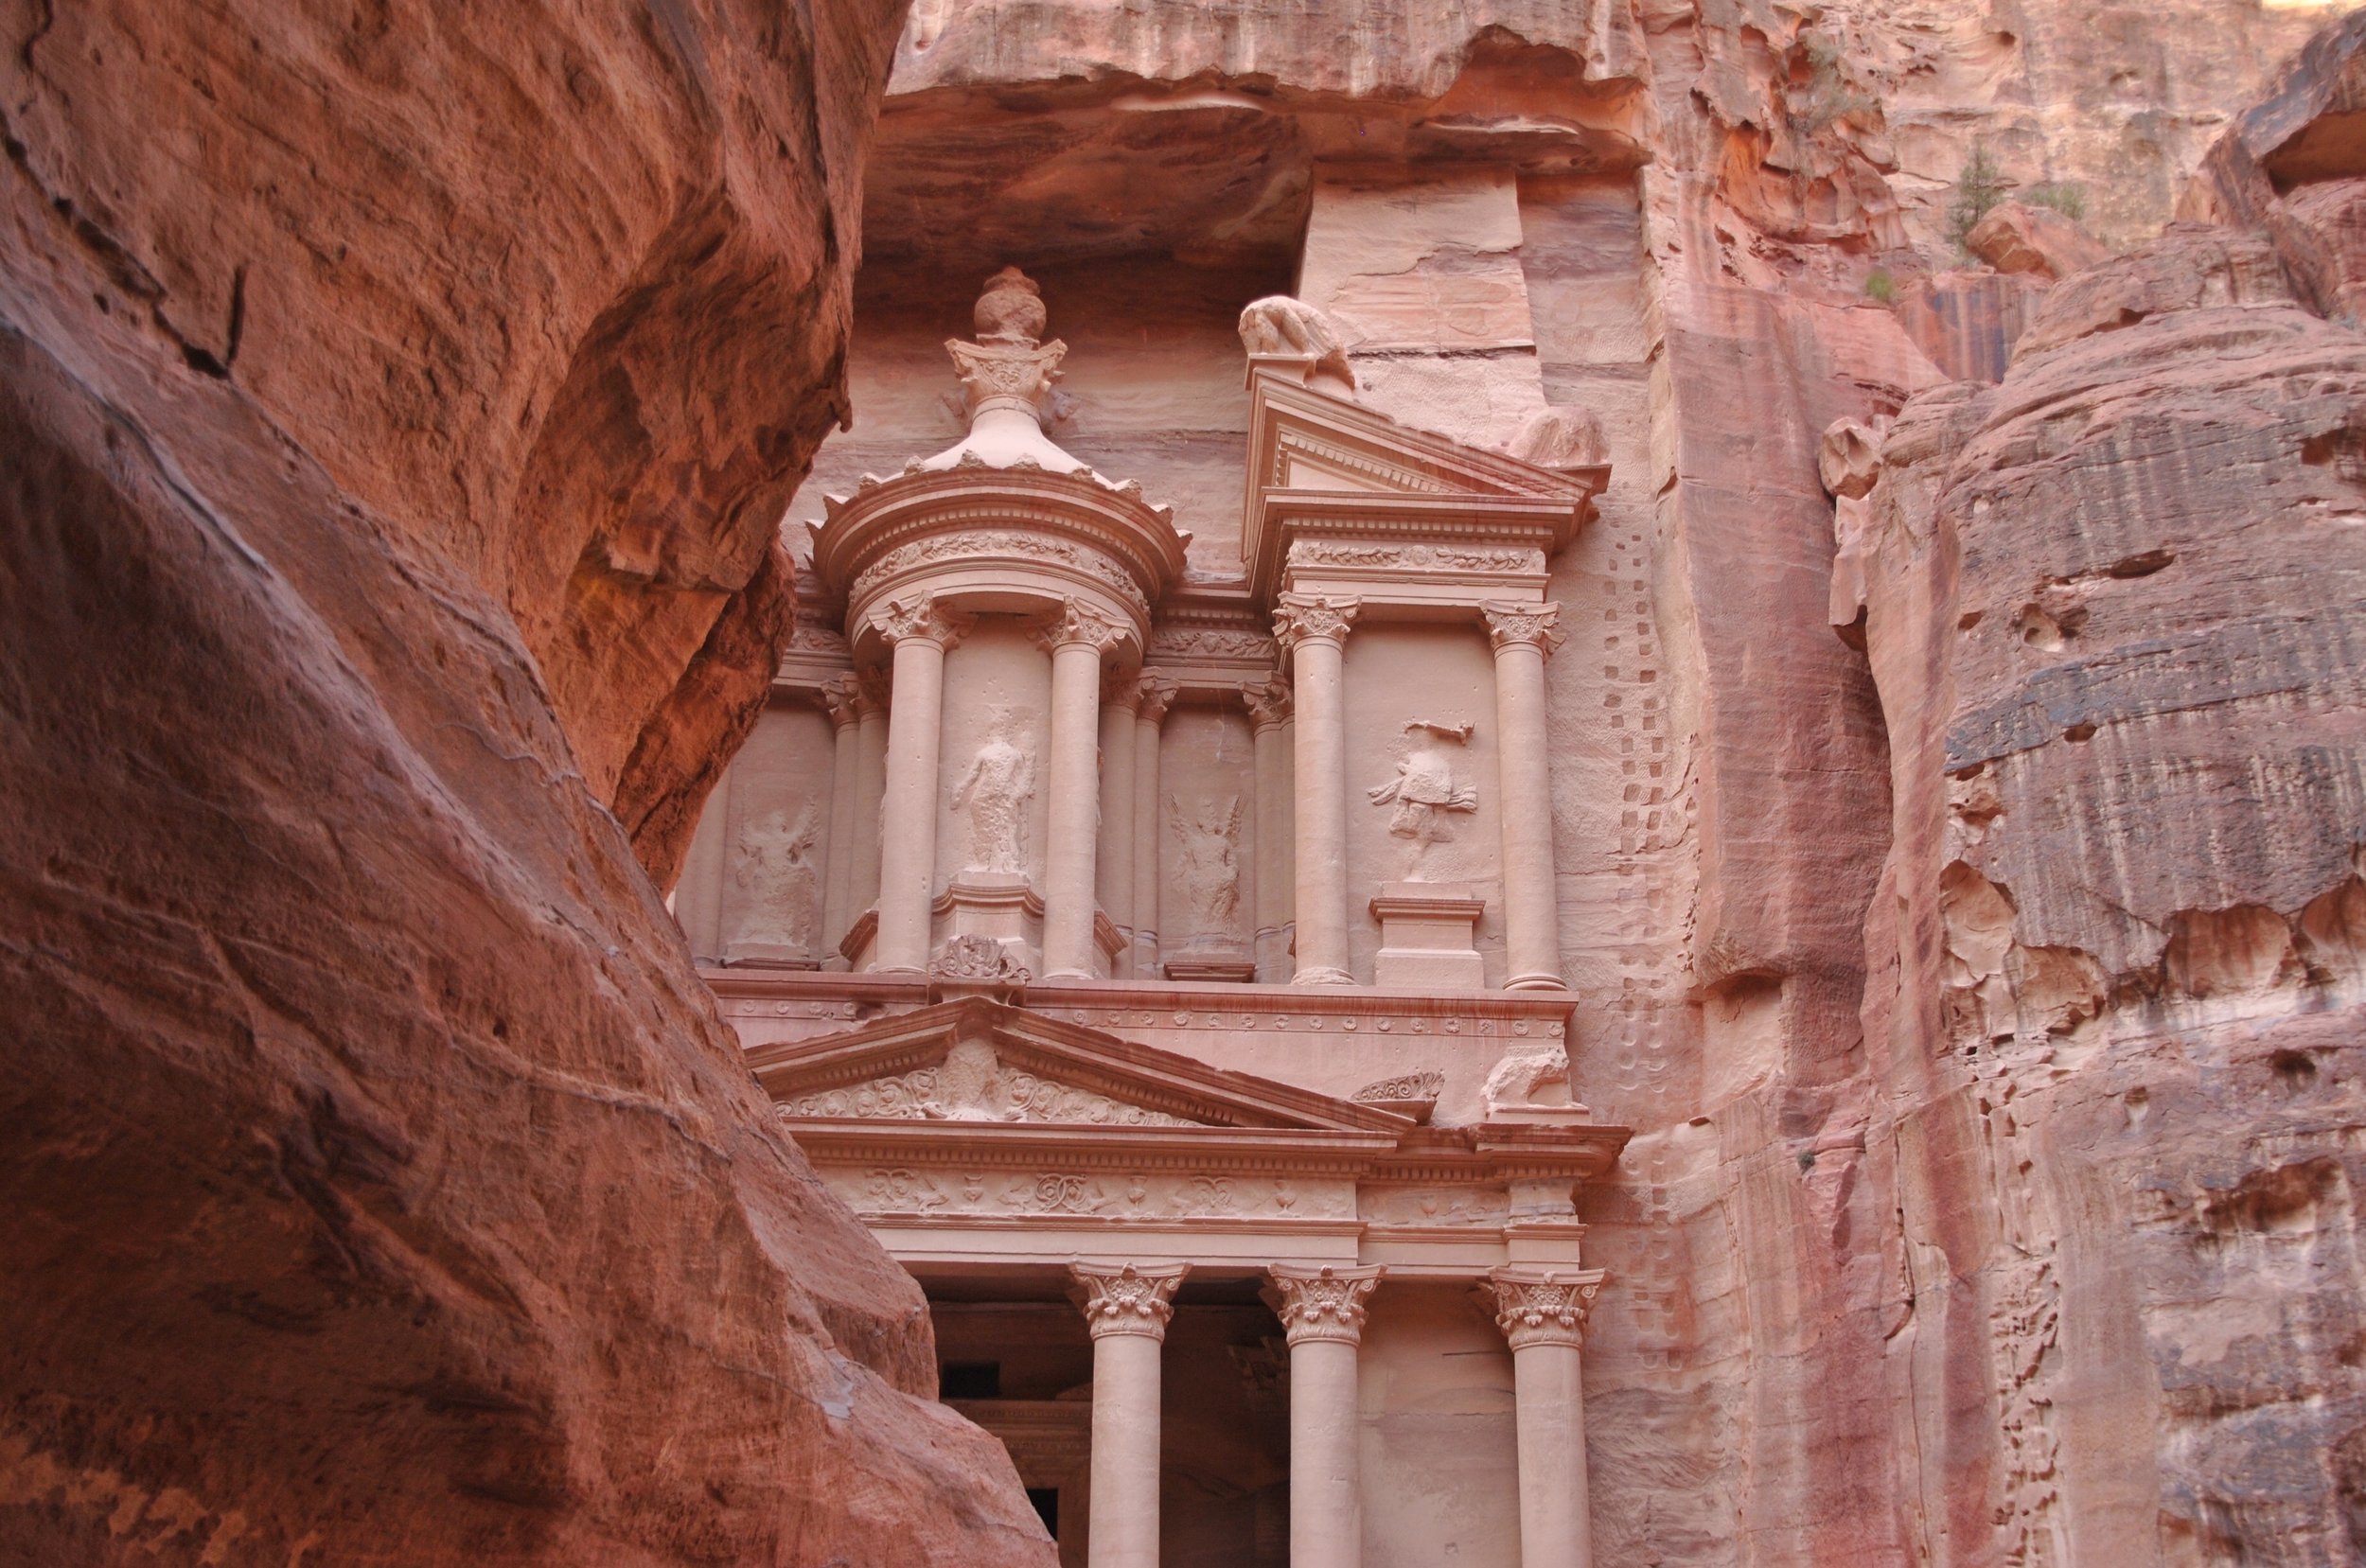 Everything you need to know to plan a trip to Jordan